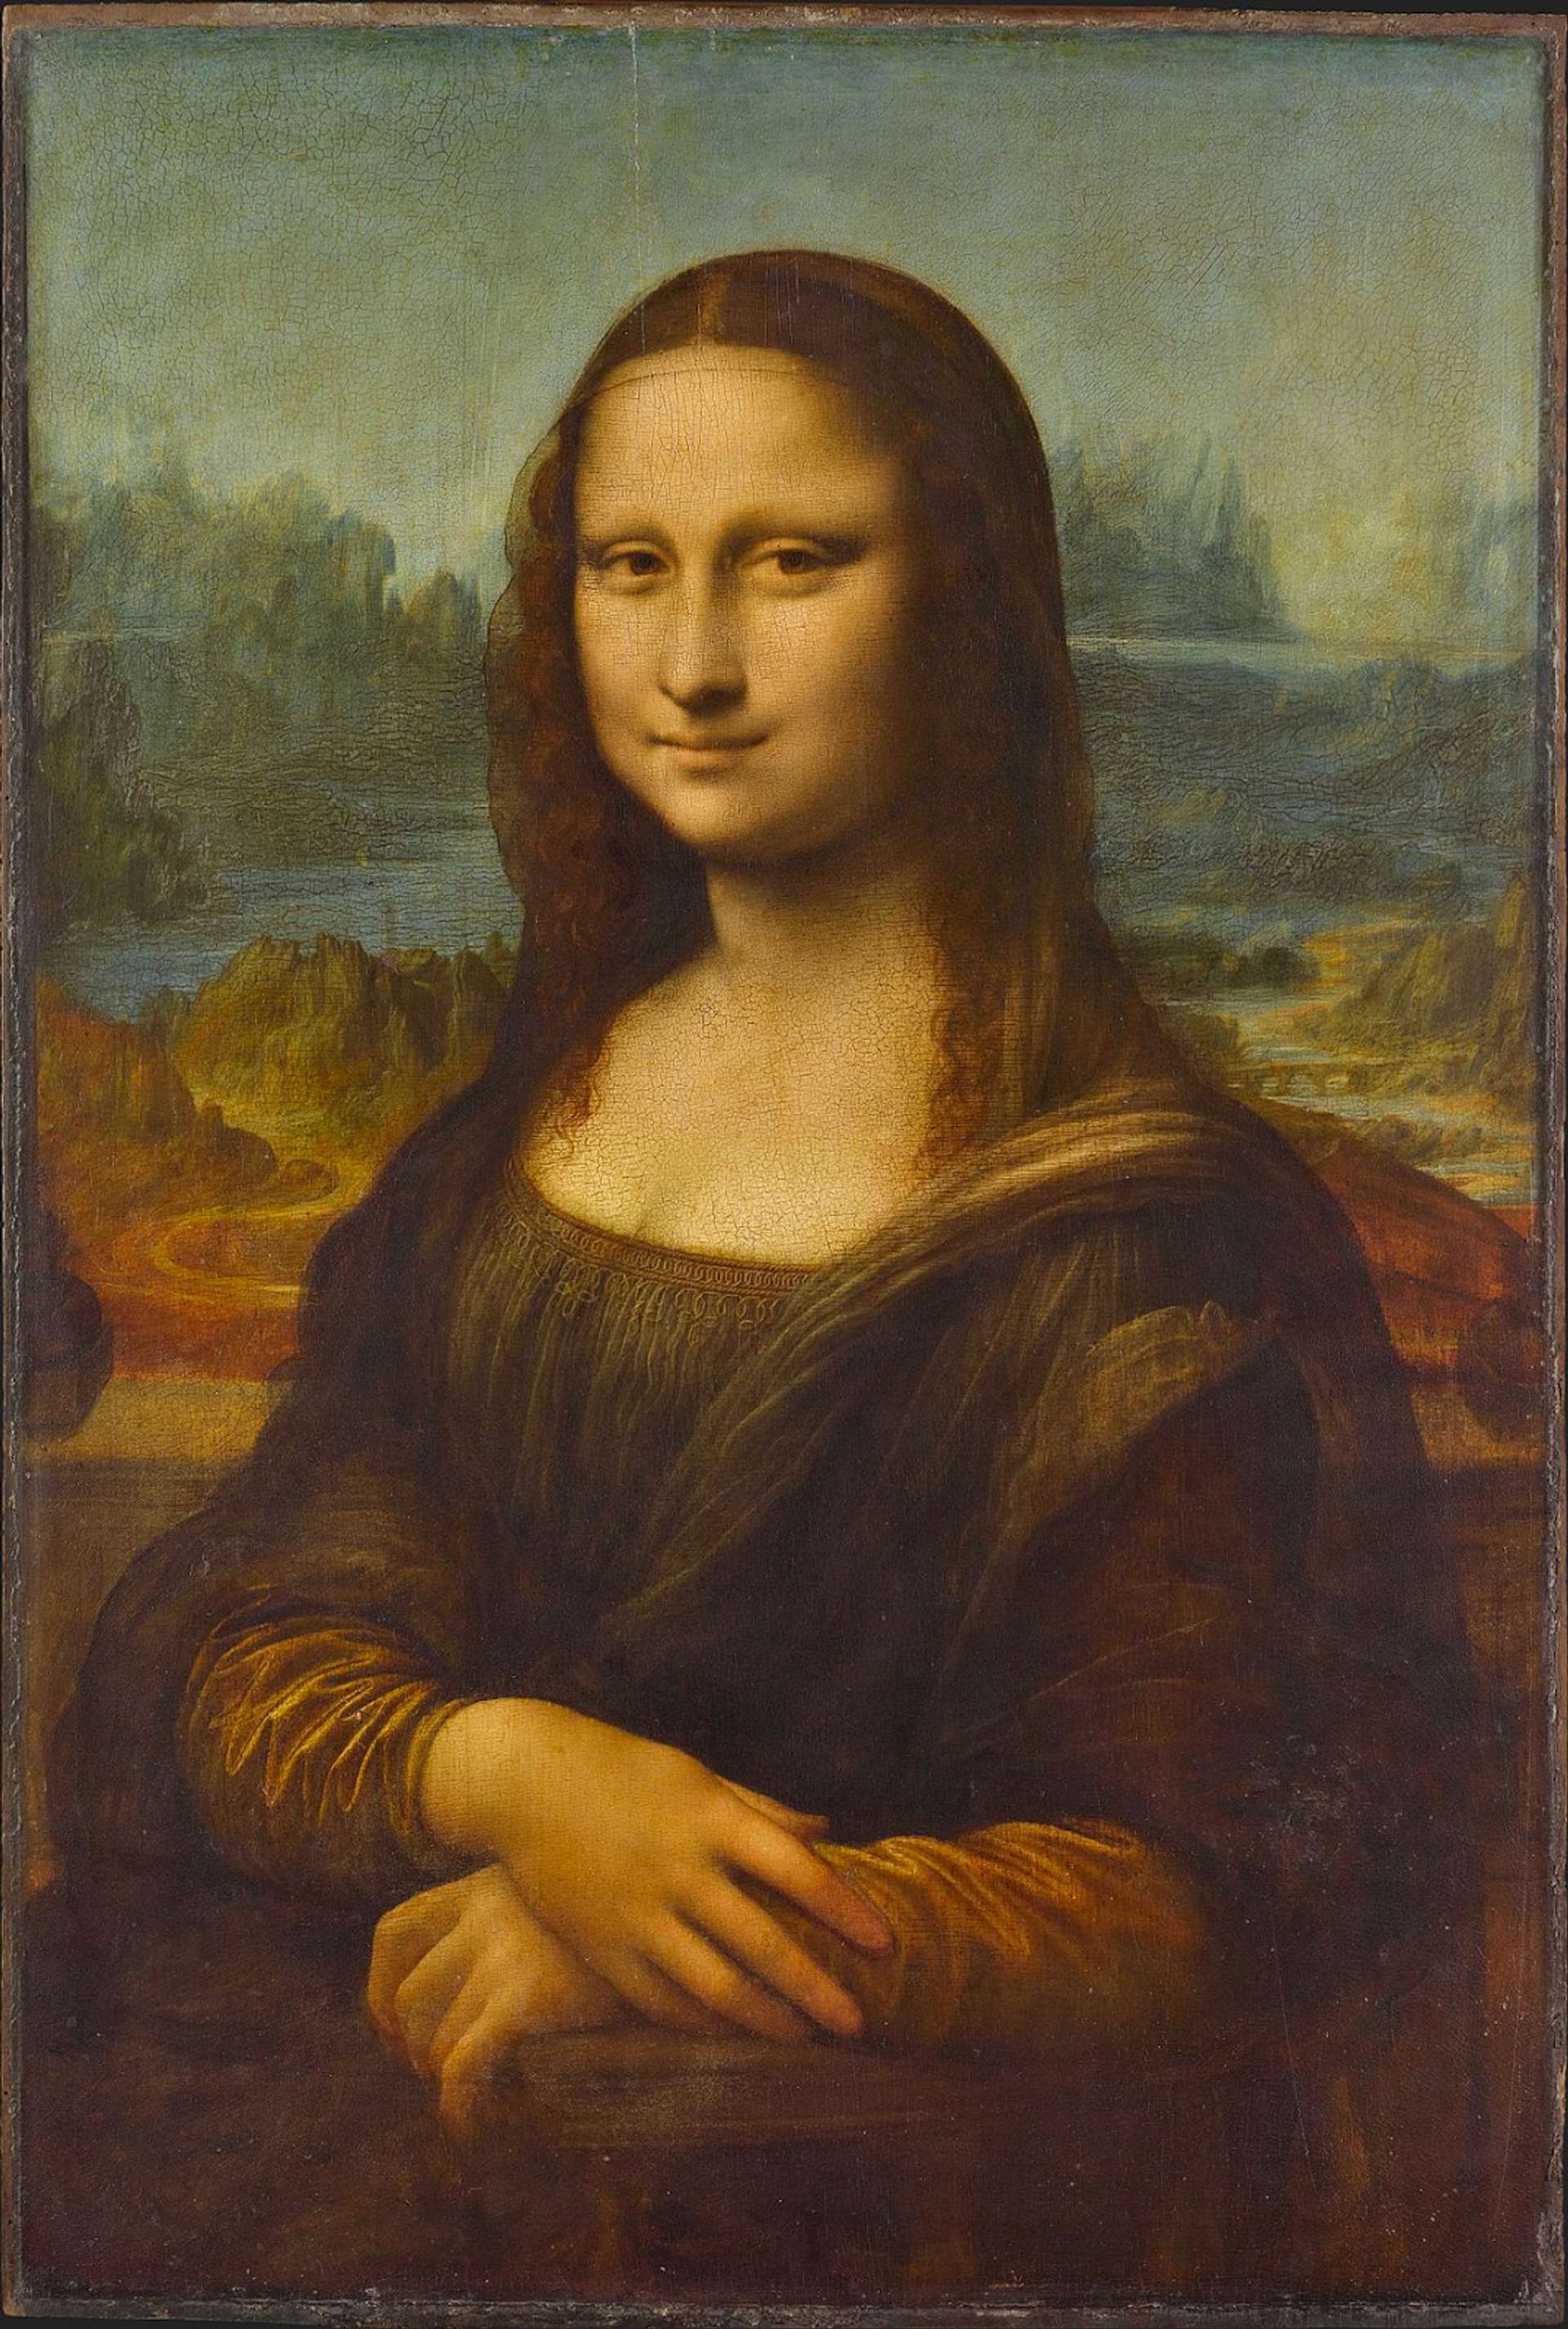 A portrait of Leonardo da Vinci’s The Mona Lisa. A woman seated with her arms folded and a subtle expression on her face.